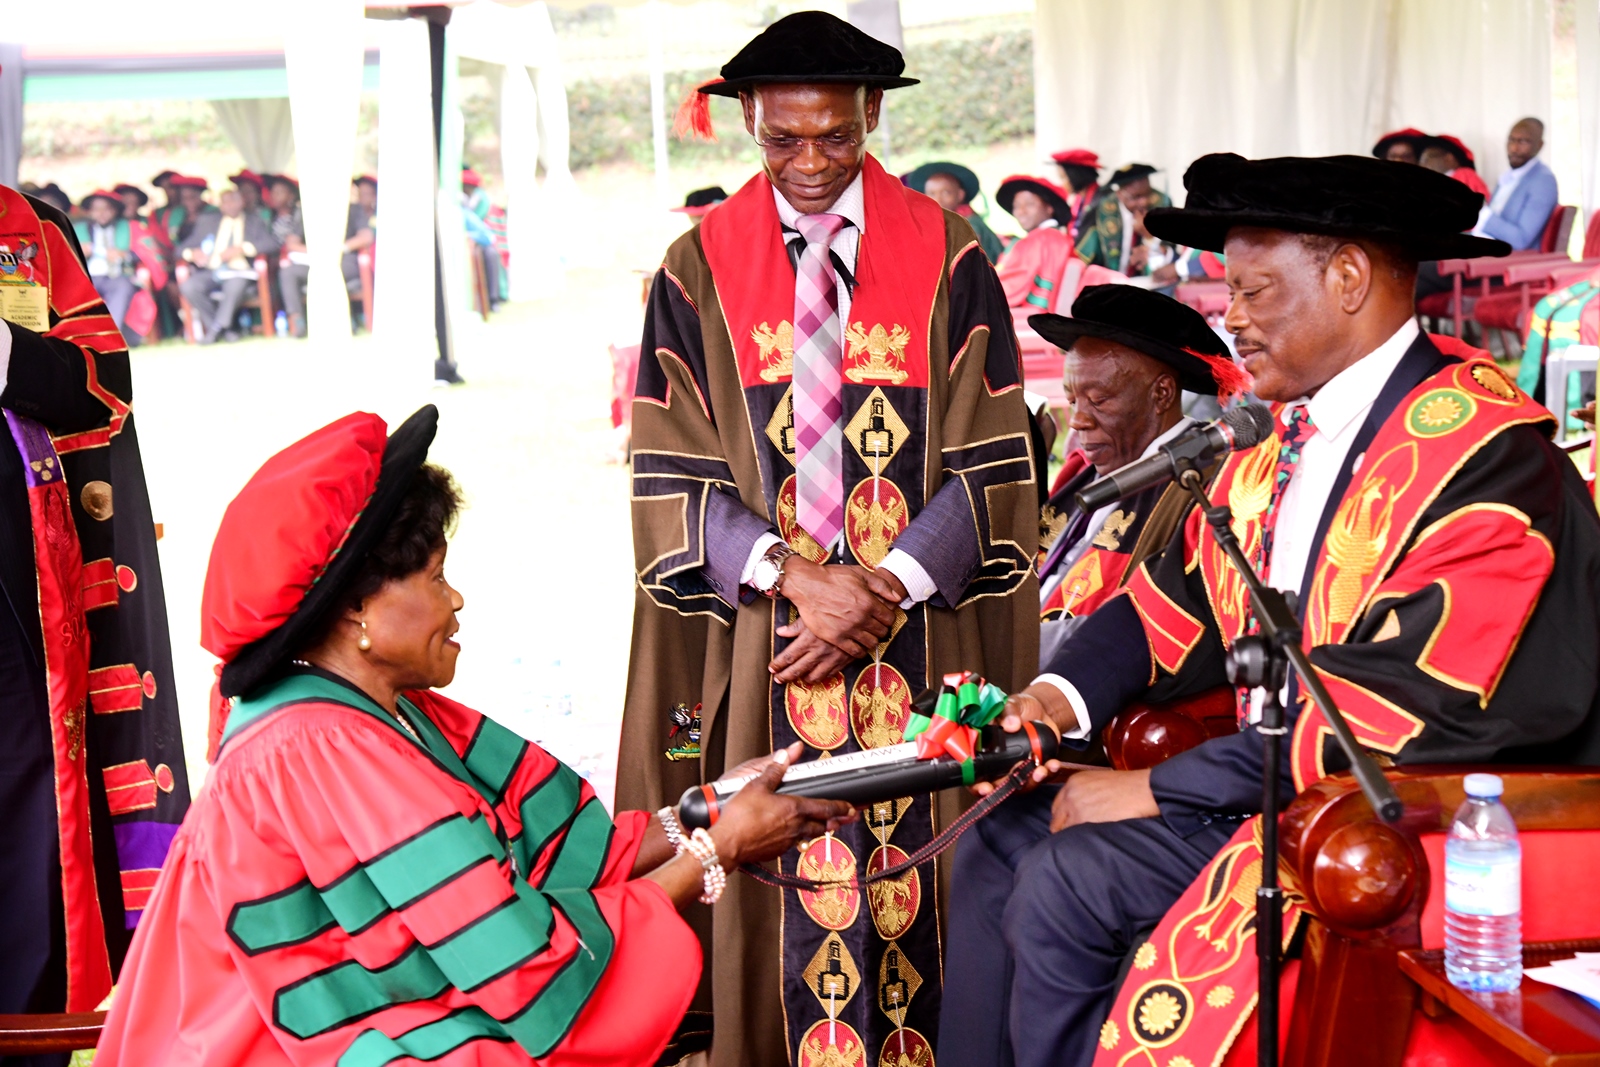 The Vice Chancellor, Prof. Barnabas Nawangwe (Right) presents Hon. Betty Oyella Bigombe (Left) with the Honorary Doctor of Laws, Honoris Causa of Makerere University as the Deputy Vice Chancellor (Academic Affairs), Prof. Umar Kakumba (2nd Left) witnesses on Day 1 of the 74th Graduation Ceremony on 29th January 2024. 74th Graduation Ceremony, Day 1, 29th January 2024, Freedom Square, Makerere University, Kampala Uganda, East Africa.